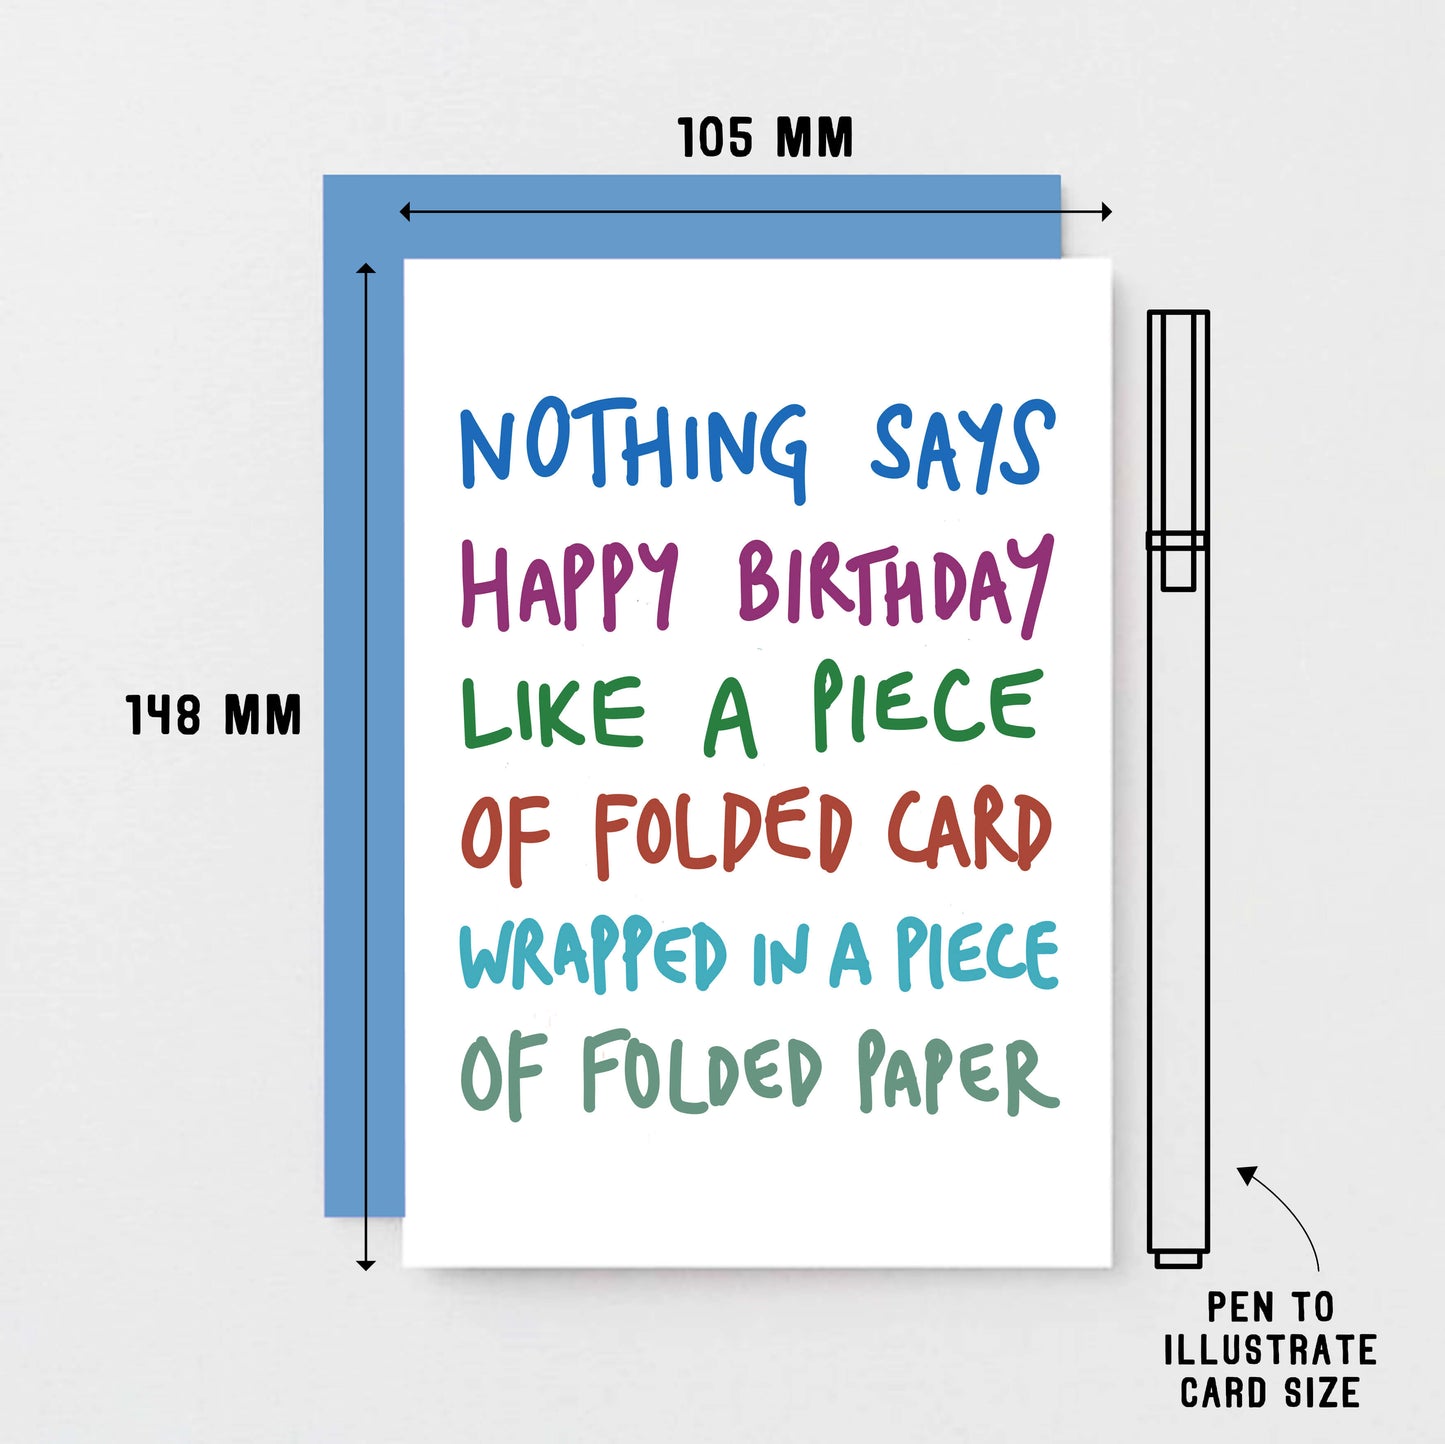 Birthday Card by SixElevenCreations. Reads Nothing says happy birthday like a piece of folded card wrapped in a piece of folded paper. Product Code SE1010A6